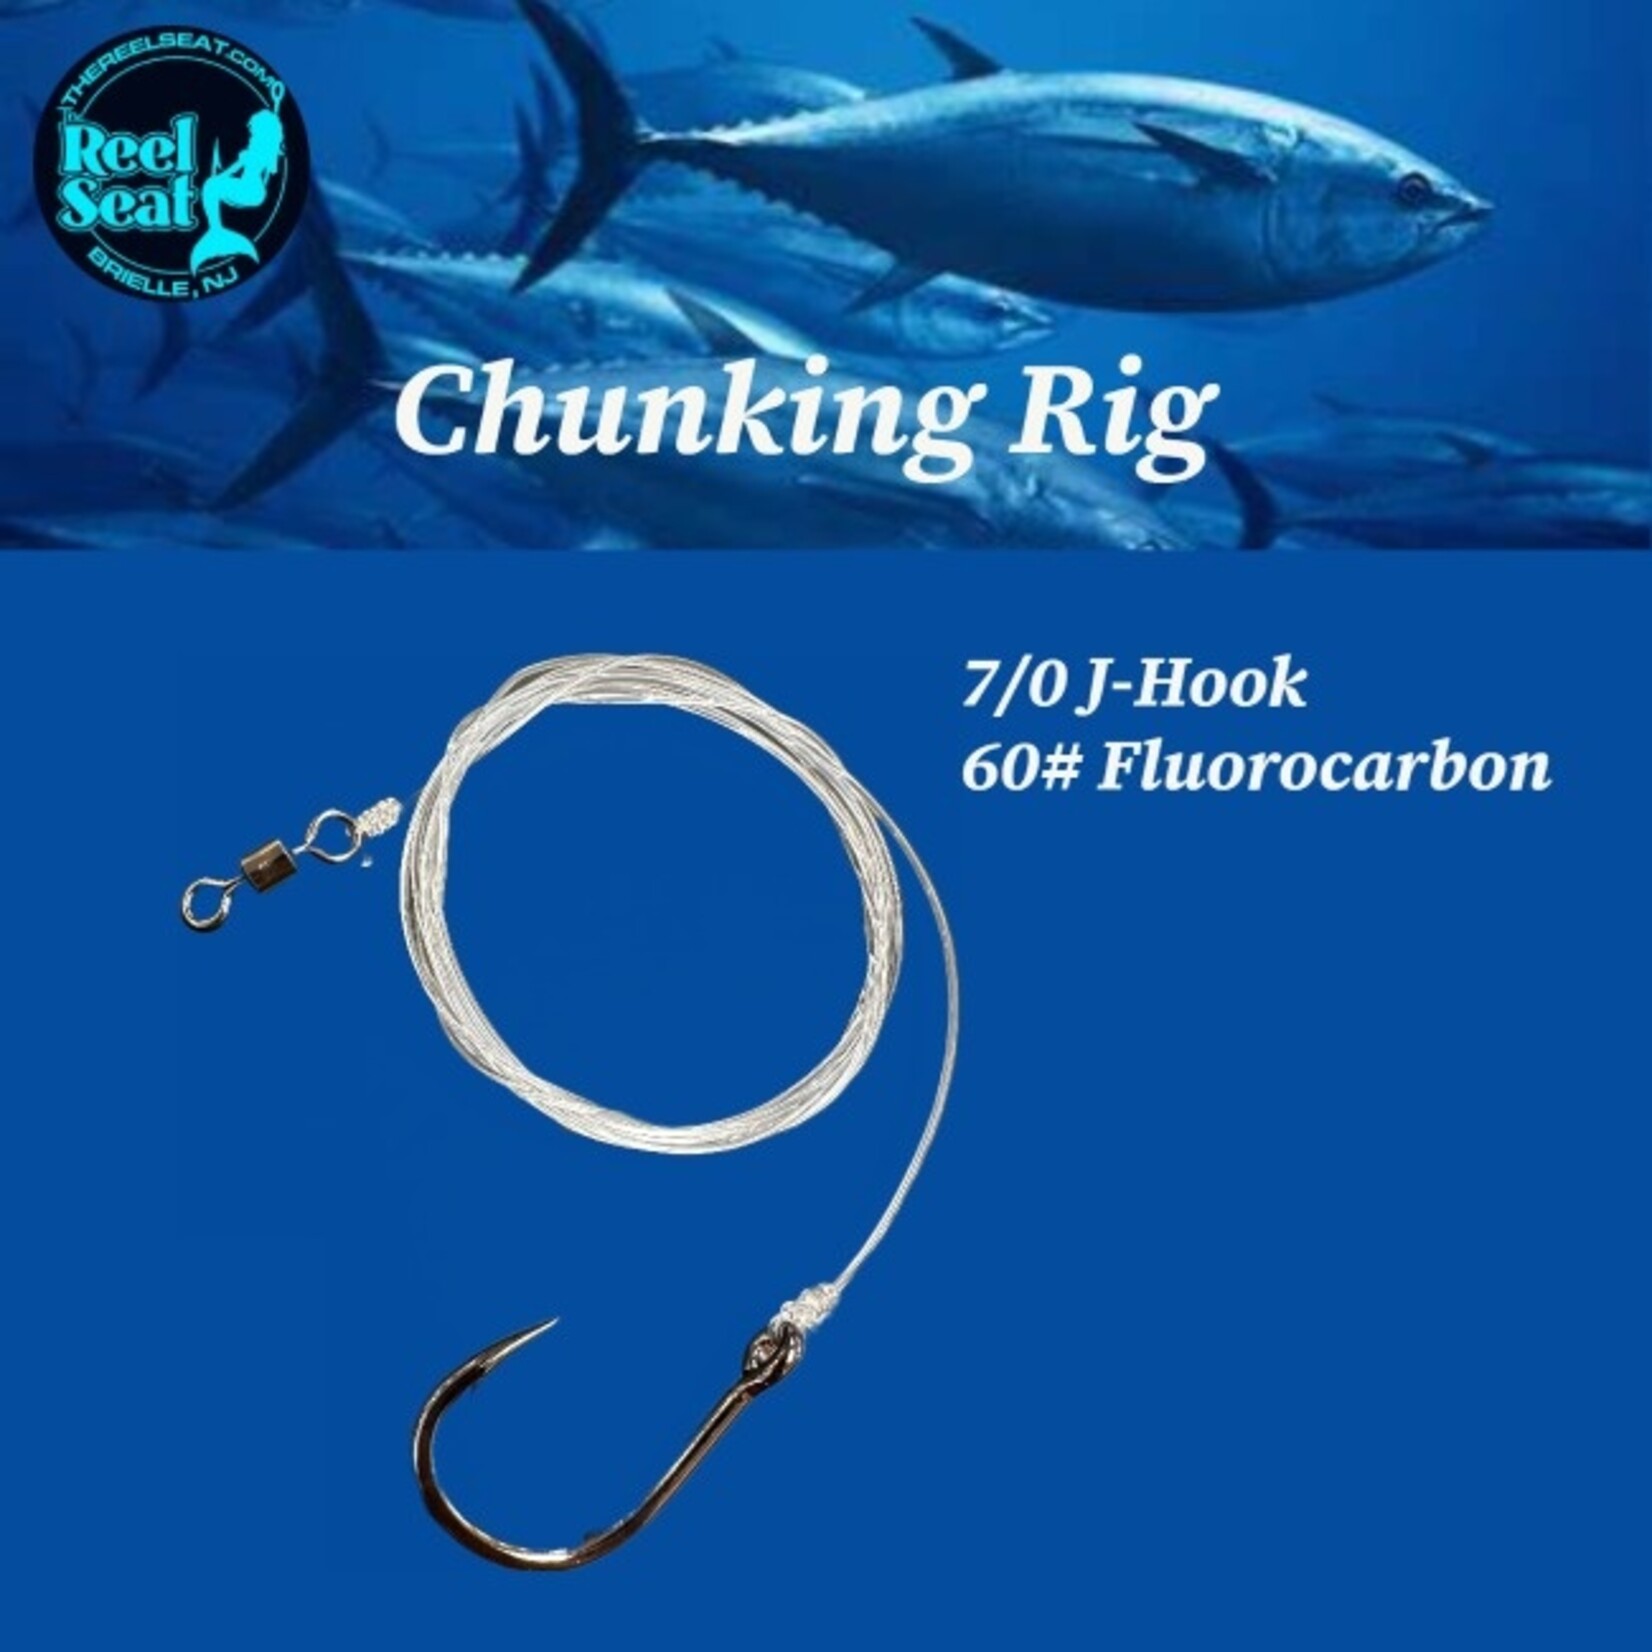 The Reel Seat RS Chunking Rig 7/0 J hook 60lbs Fluorocarbon